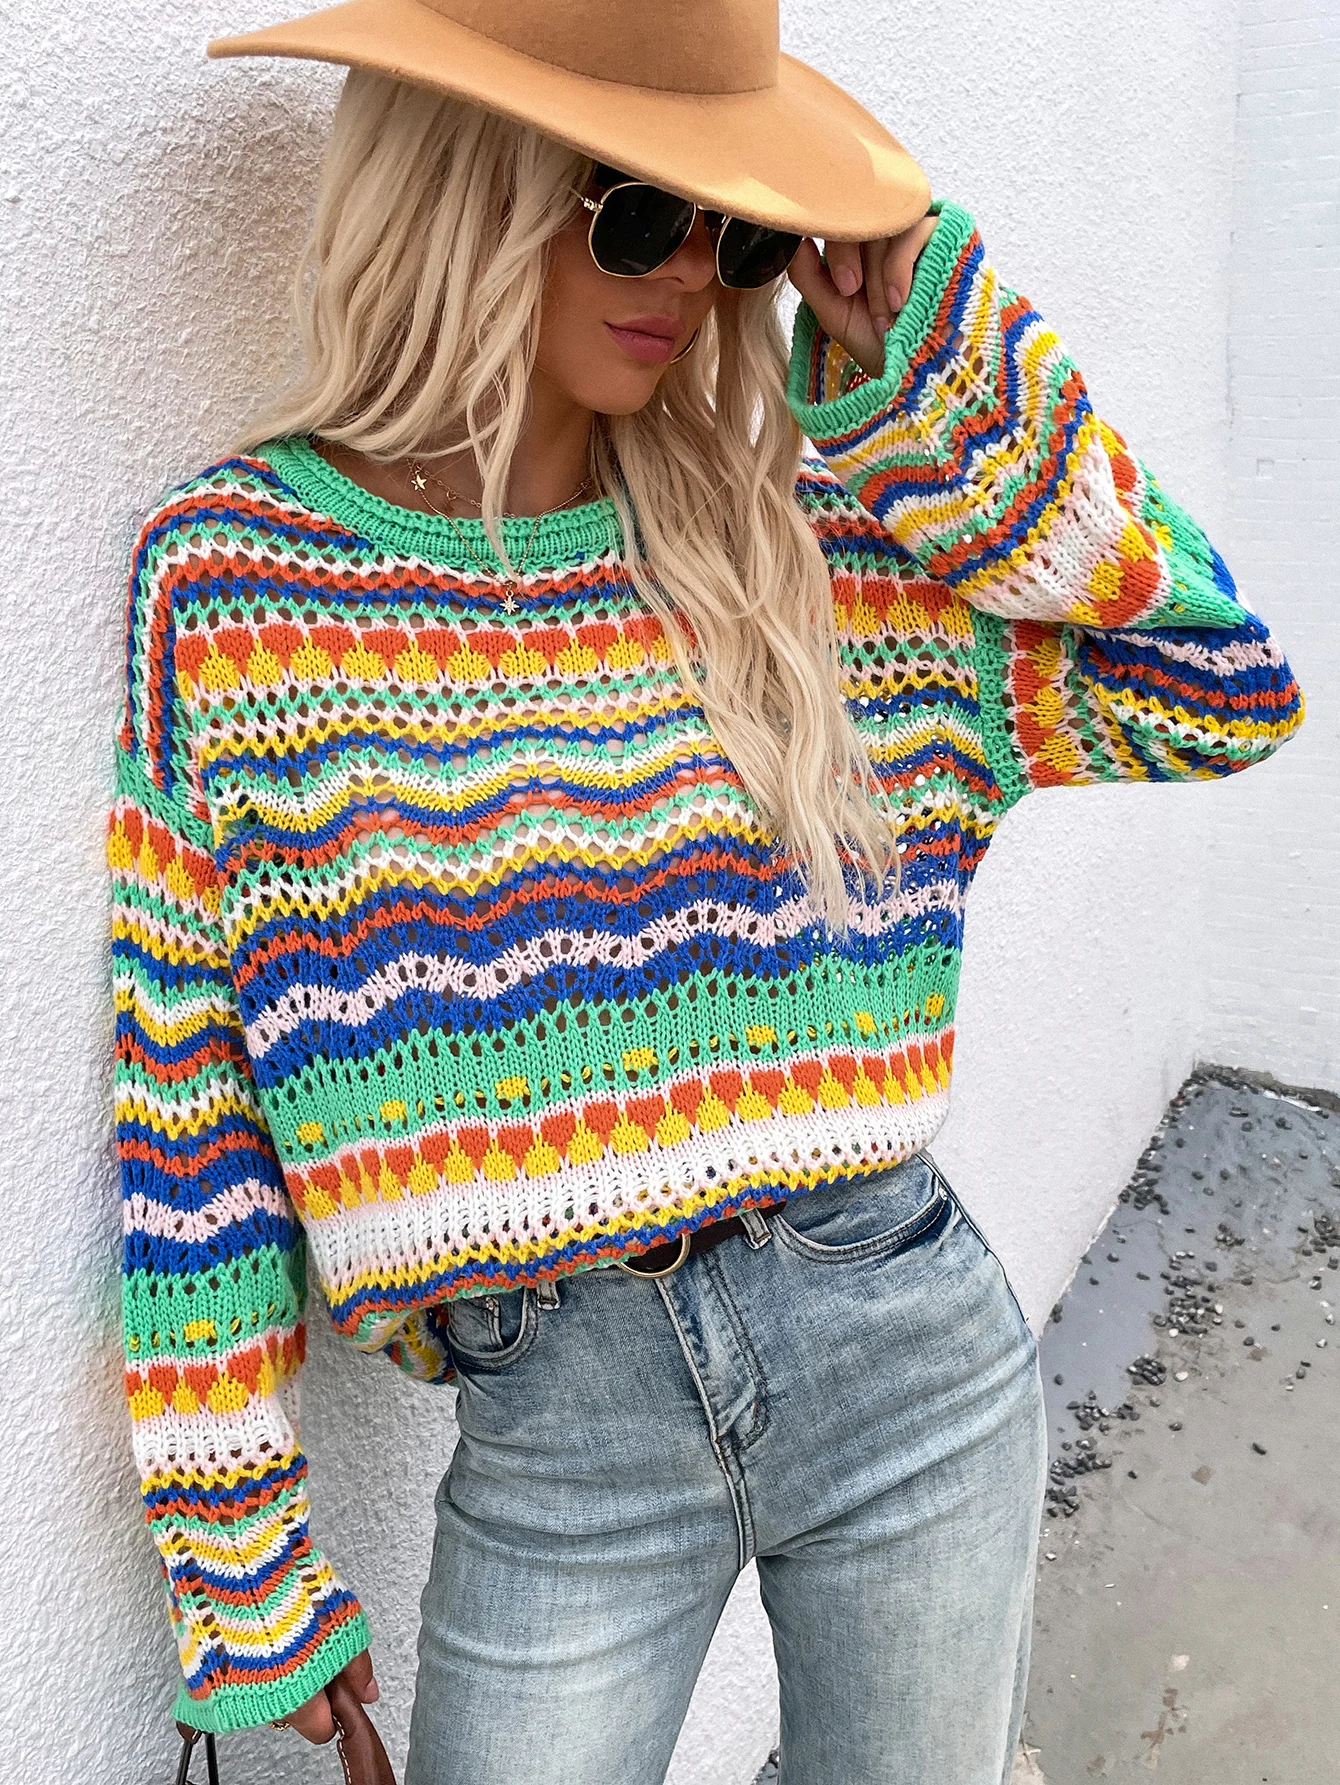 Women Knitted Striped Sweater Autumn Winter Clothes Casual Flare Long Sleeve Sweaters Loose Jumper Colorful Pullover Pull Femme winter knitted sweater women pull femme oversize loose pullover sweater flare sleeve para jumper off shoulder fish scale outwear